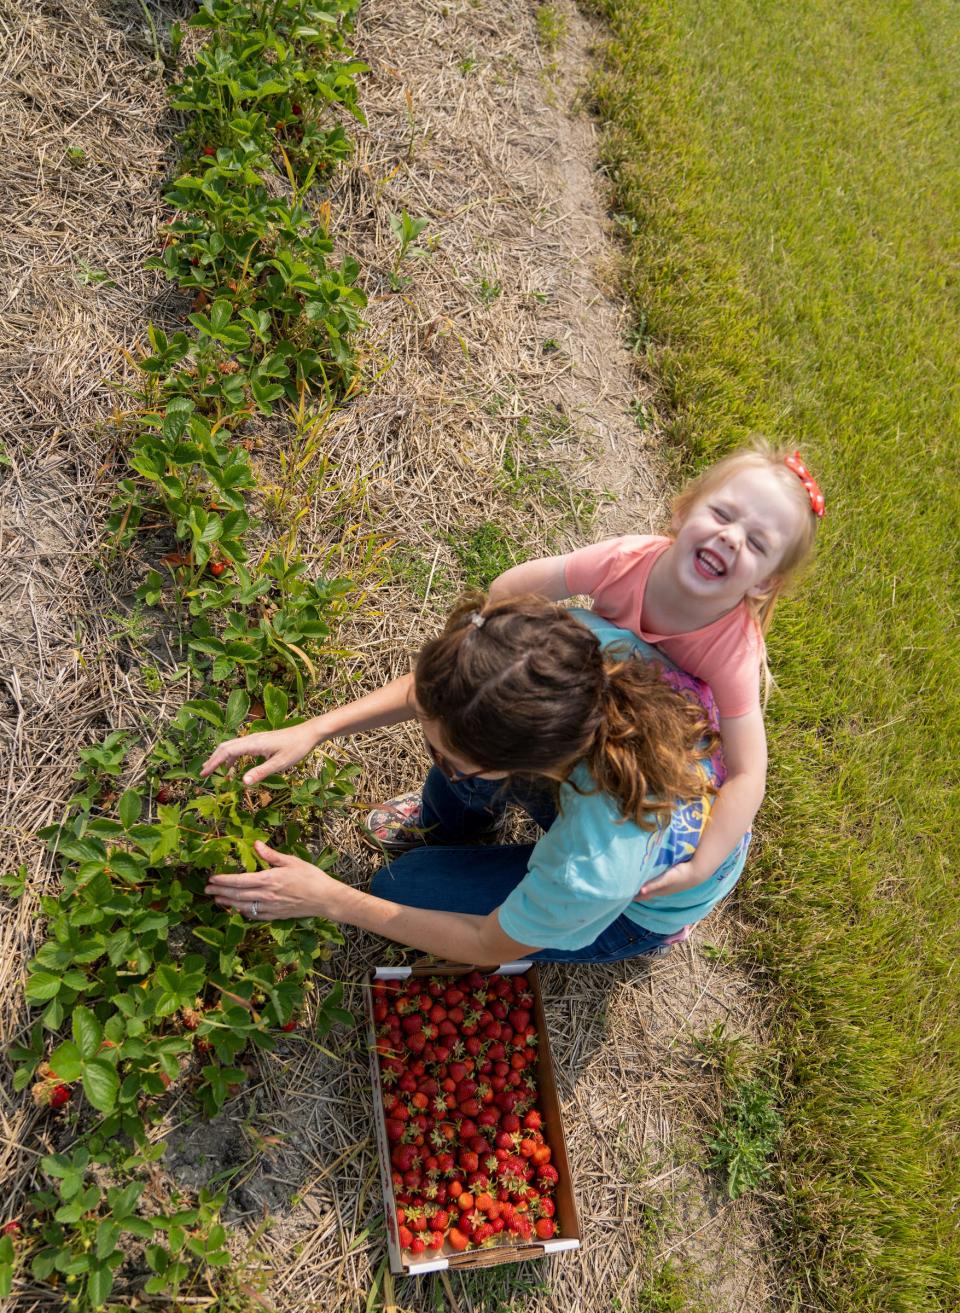 Wren Seals laughs while picking strawberries with her mother, Malorie Seals, on opening day at Whittaker’s Berry Farm in Ida on Wednesday, June 7, 2023. The Whittakers have 14 acres of strawberries to share with the community during their brief 18-21 day season.